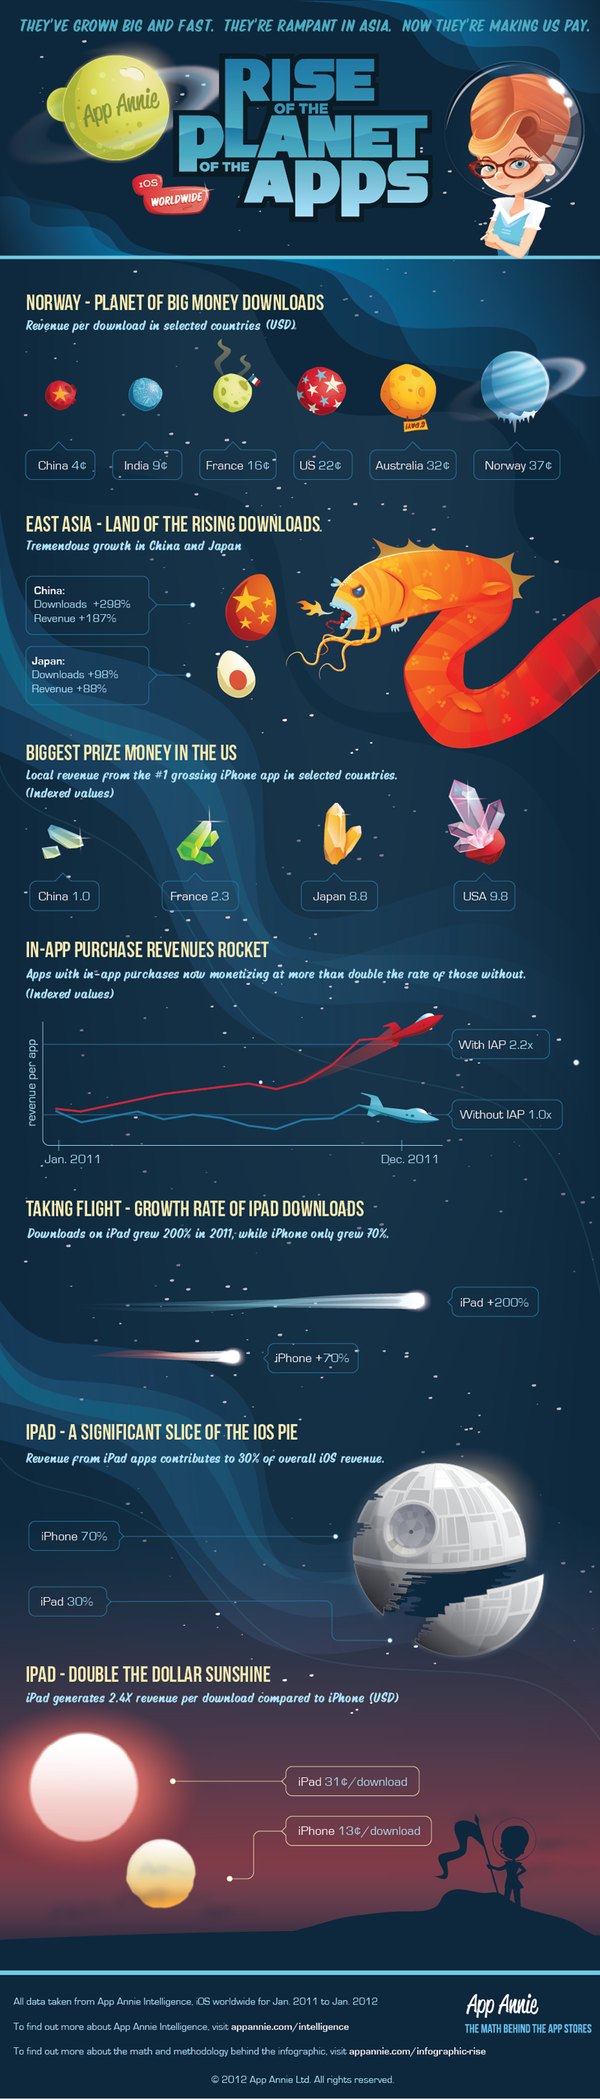 App Annie Infographic by Clancy Dalebout